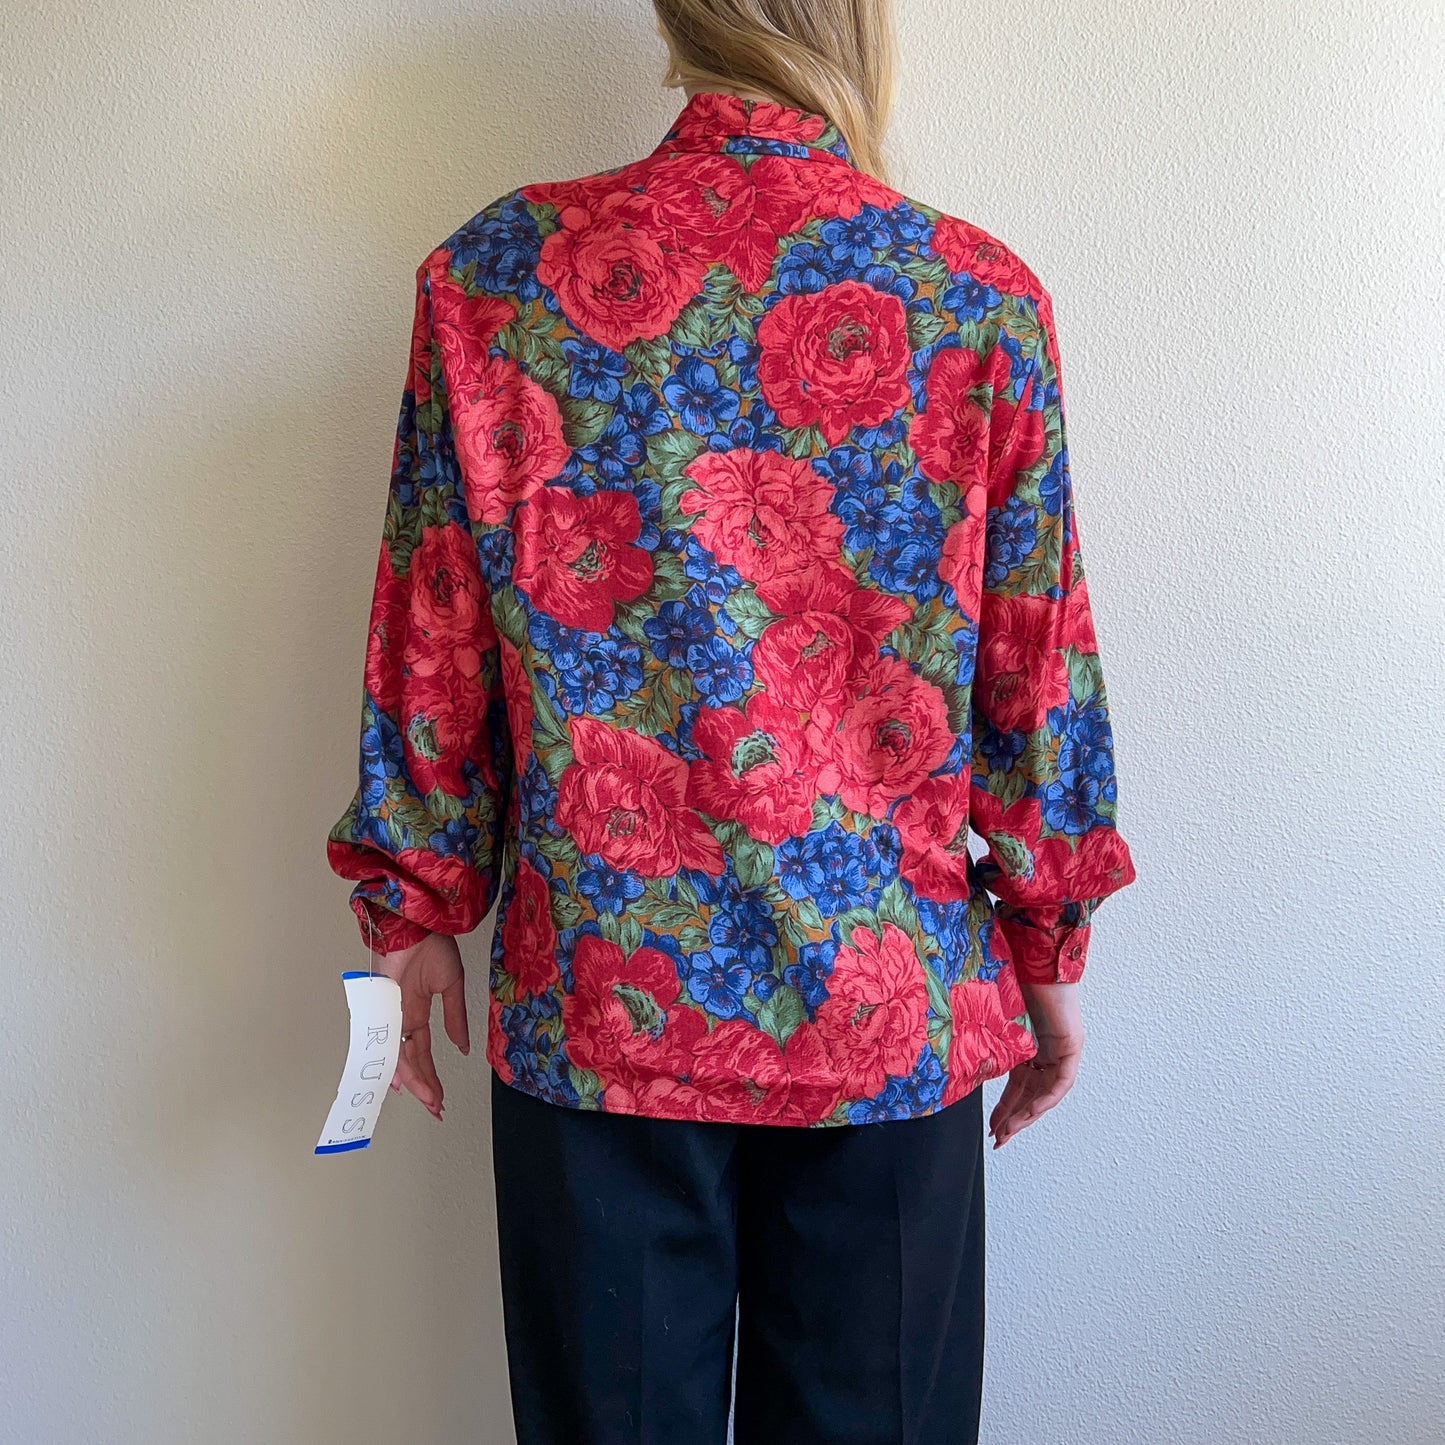 Deadstock 1990s Bountiful Red Roses Blouse (L/XL)